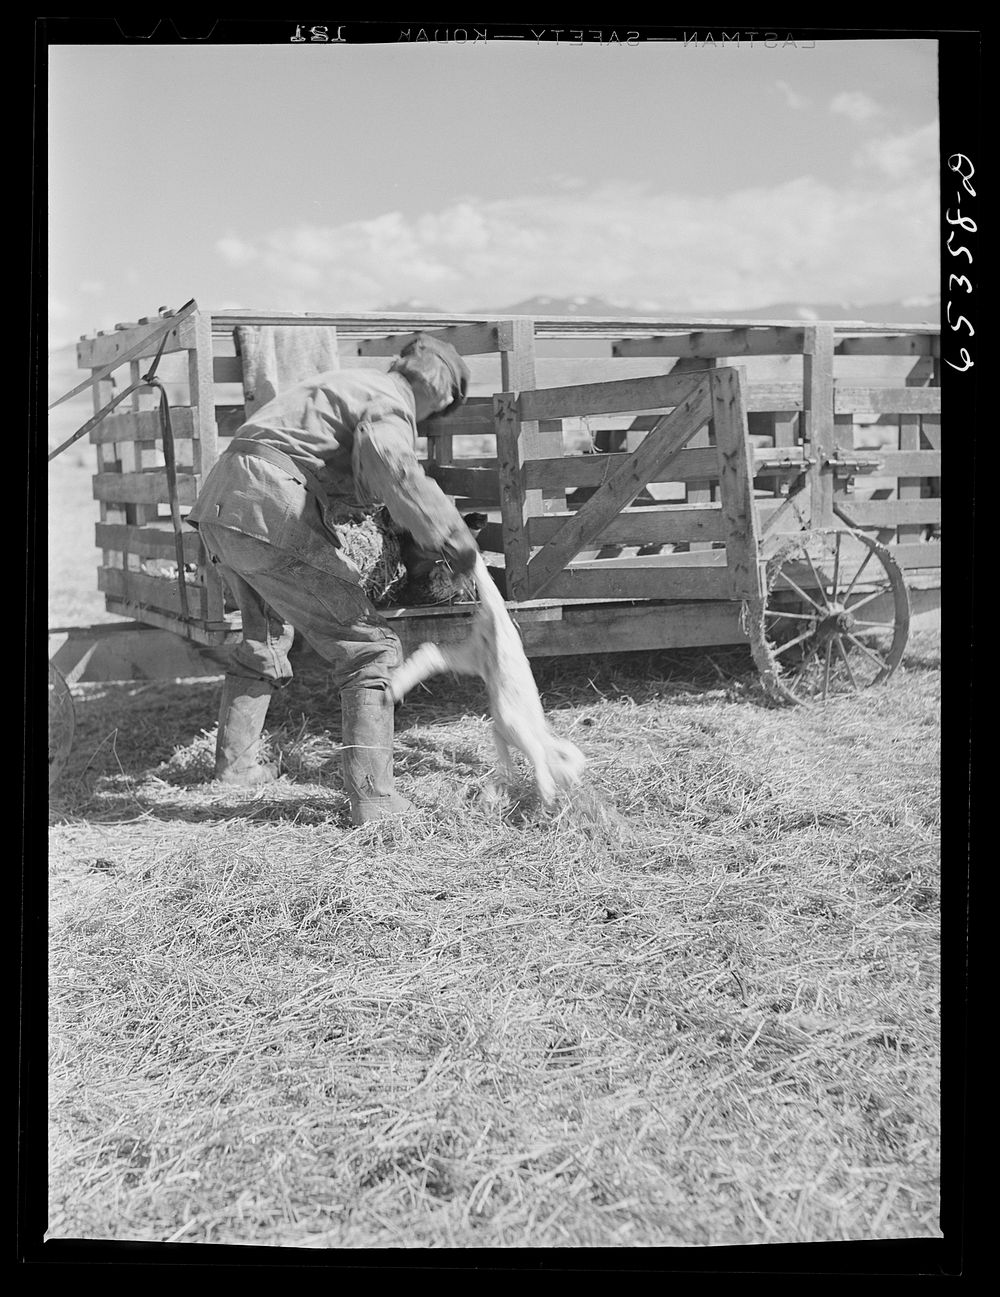 Ravalli County, Montana. Putting new lamb into the "gut wagon". Sourced from the Library of Congress.